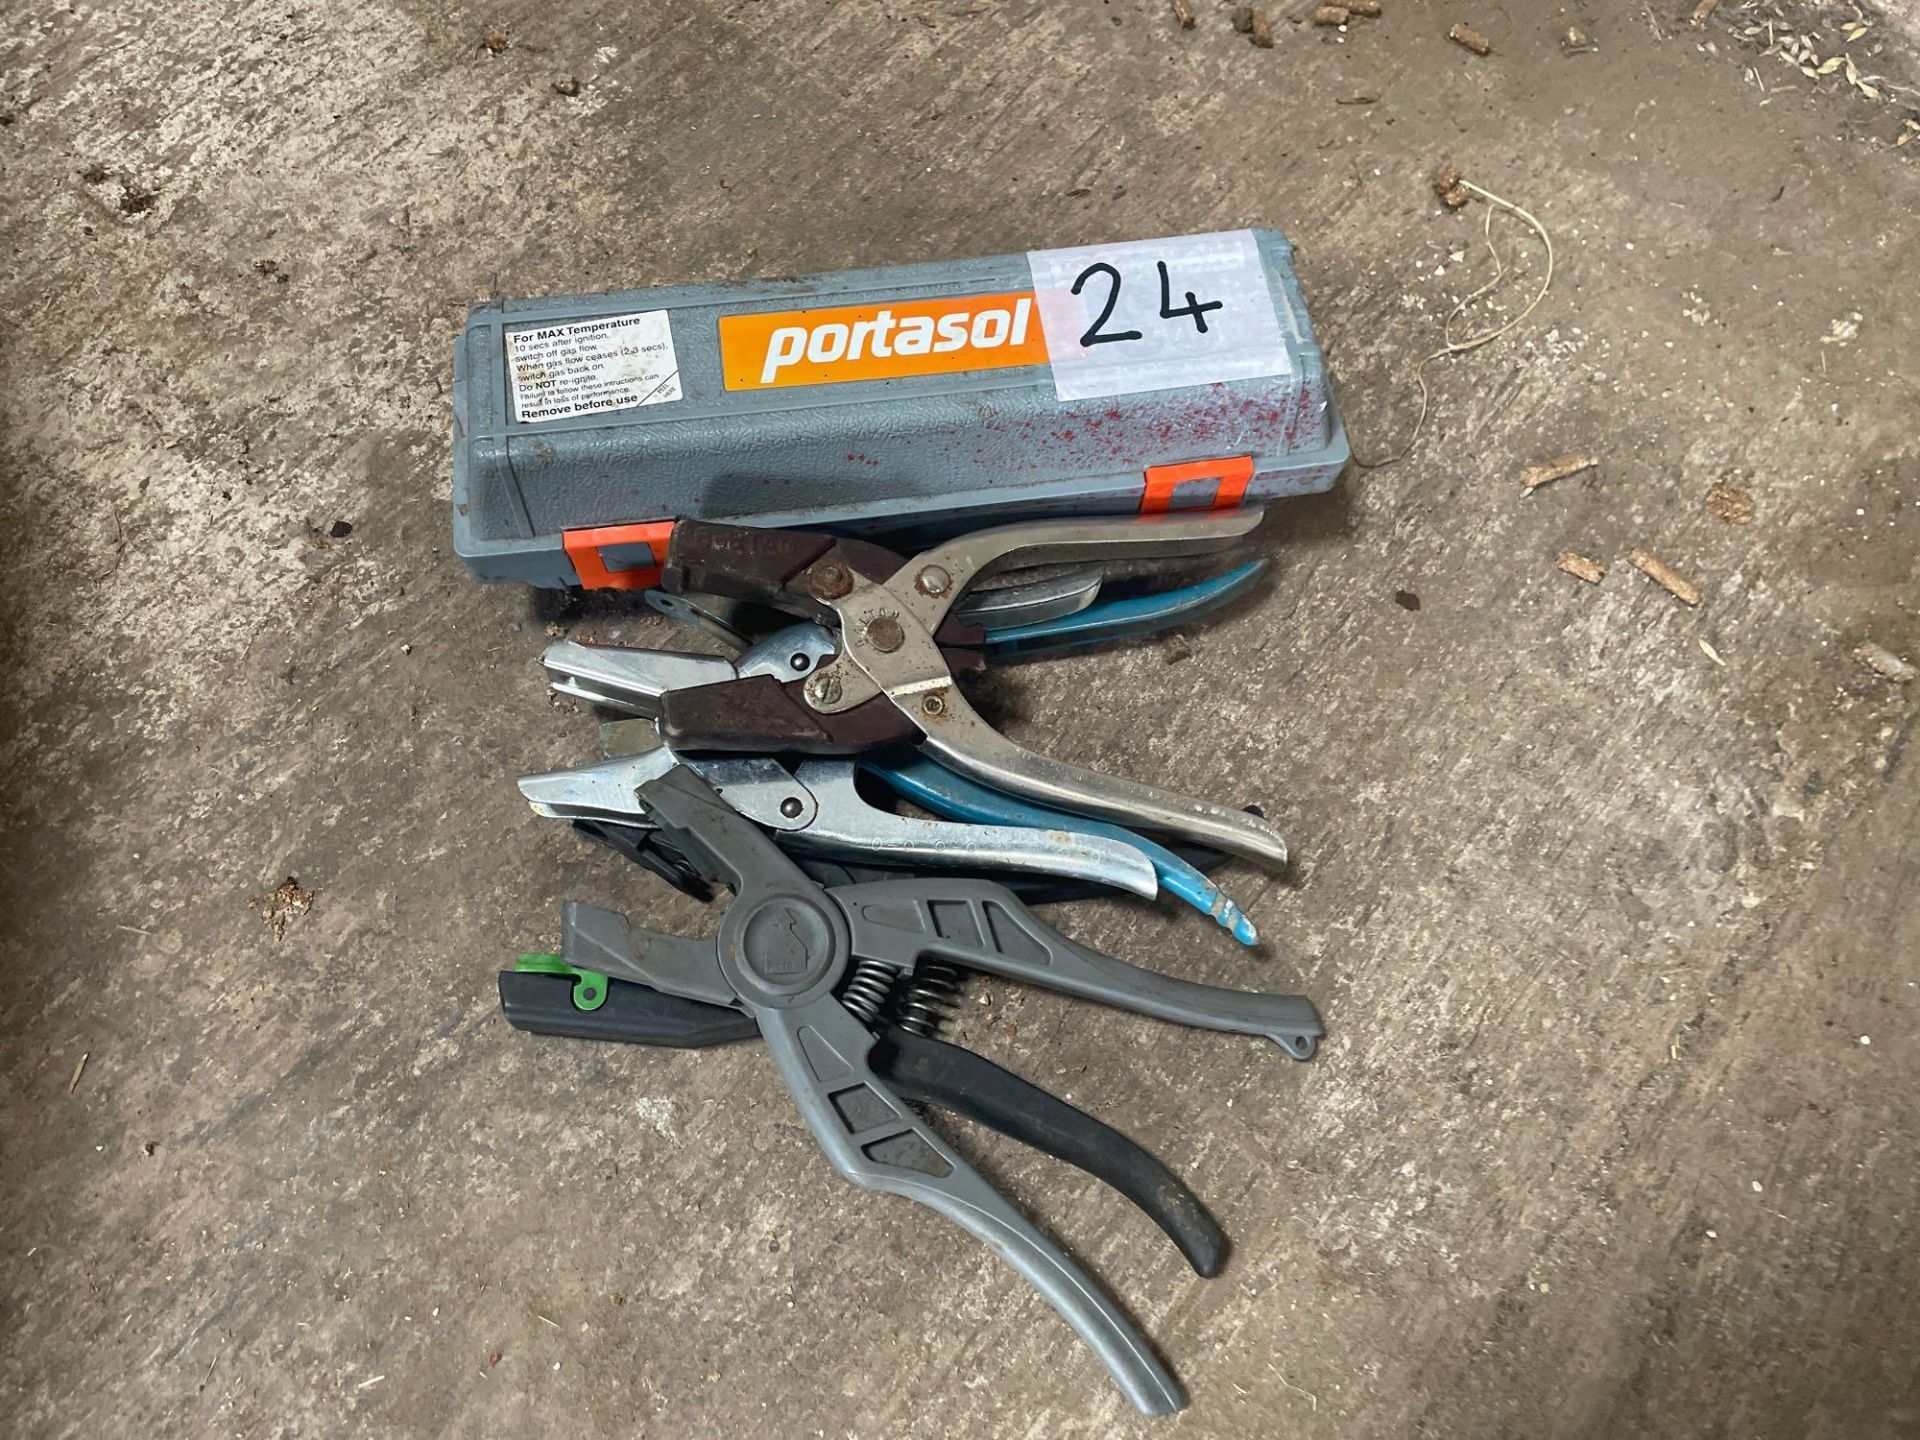 Portasol dehorning iron and ear taggers